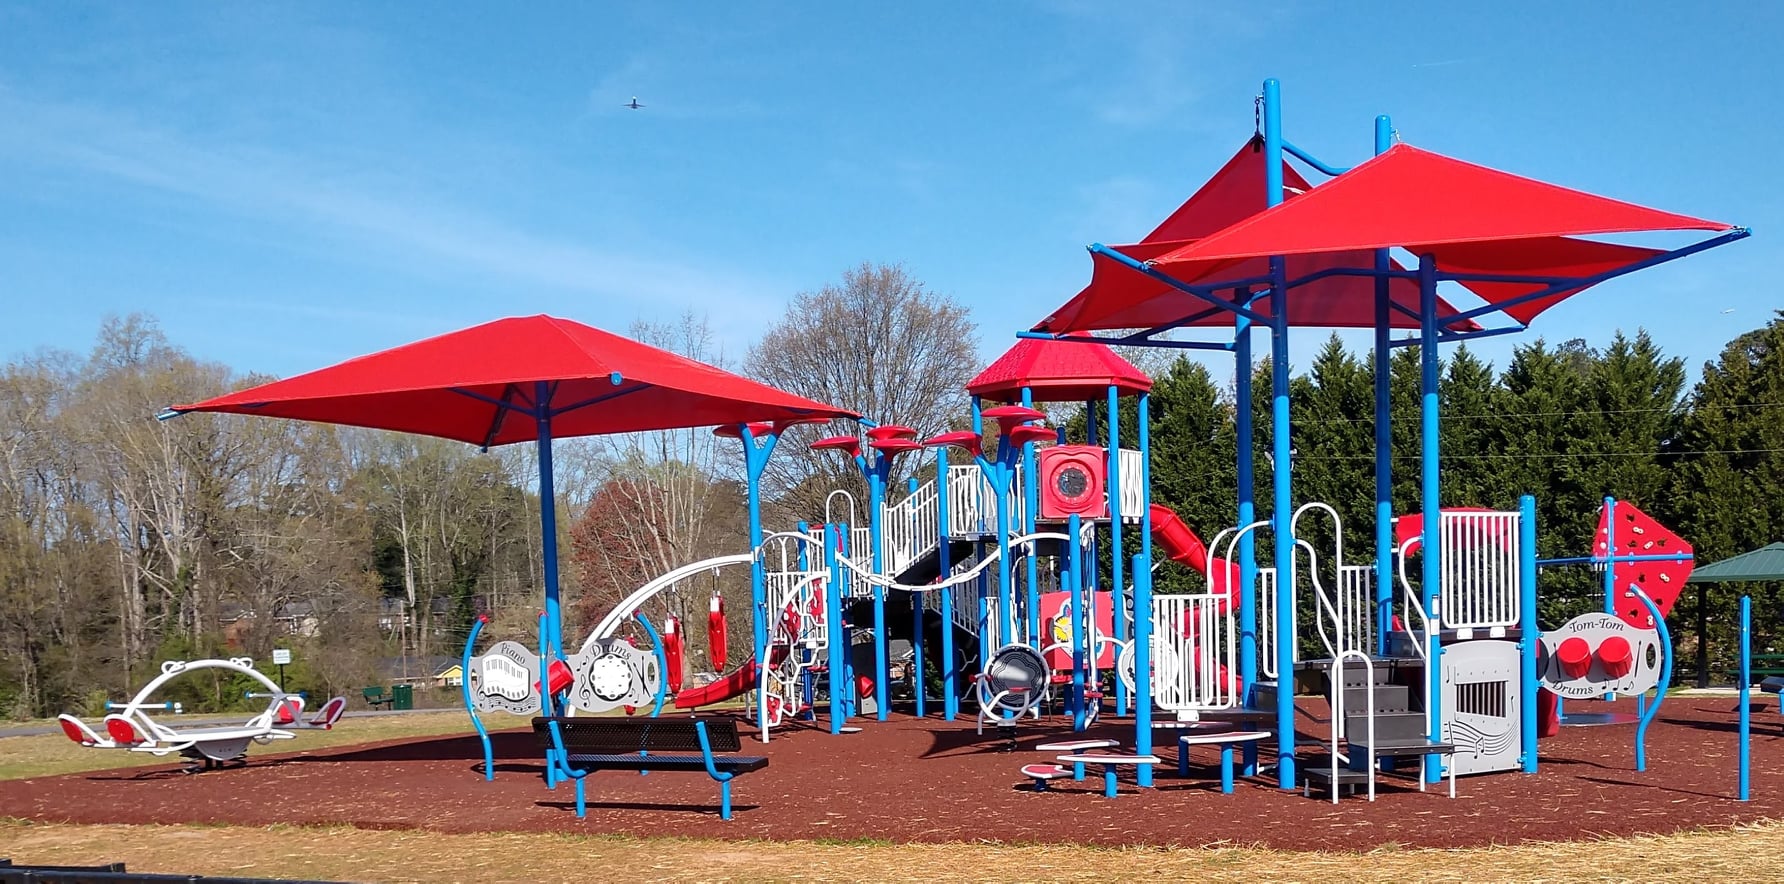 a playground with large red shade covers